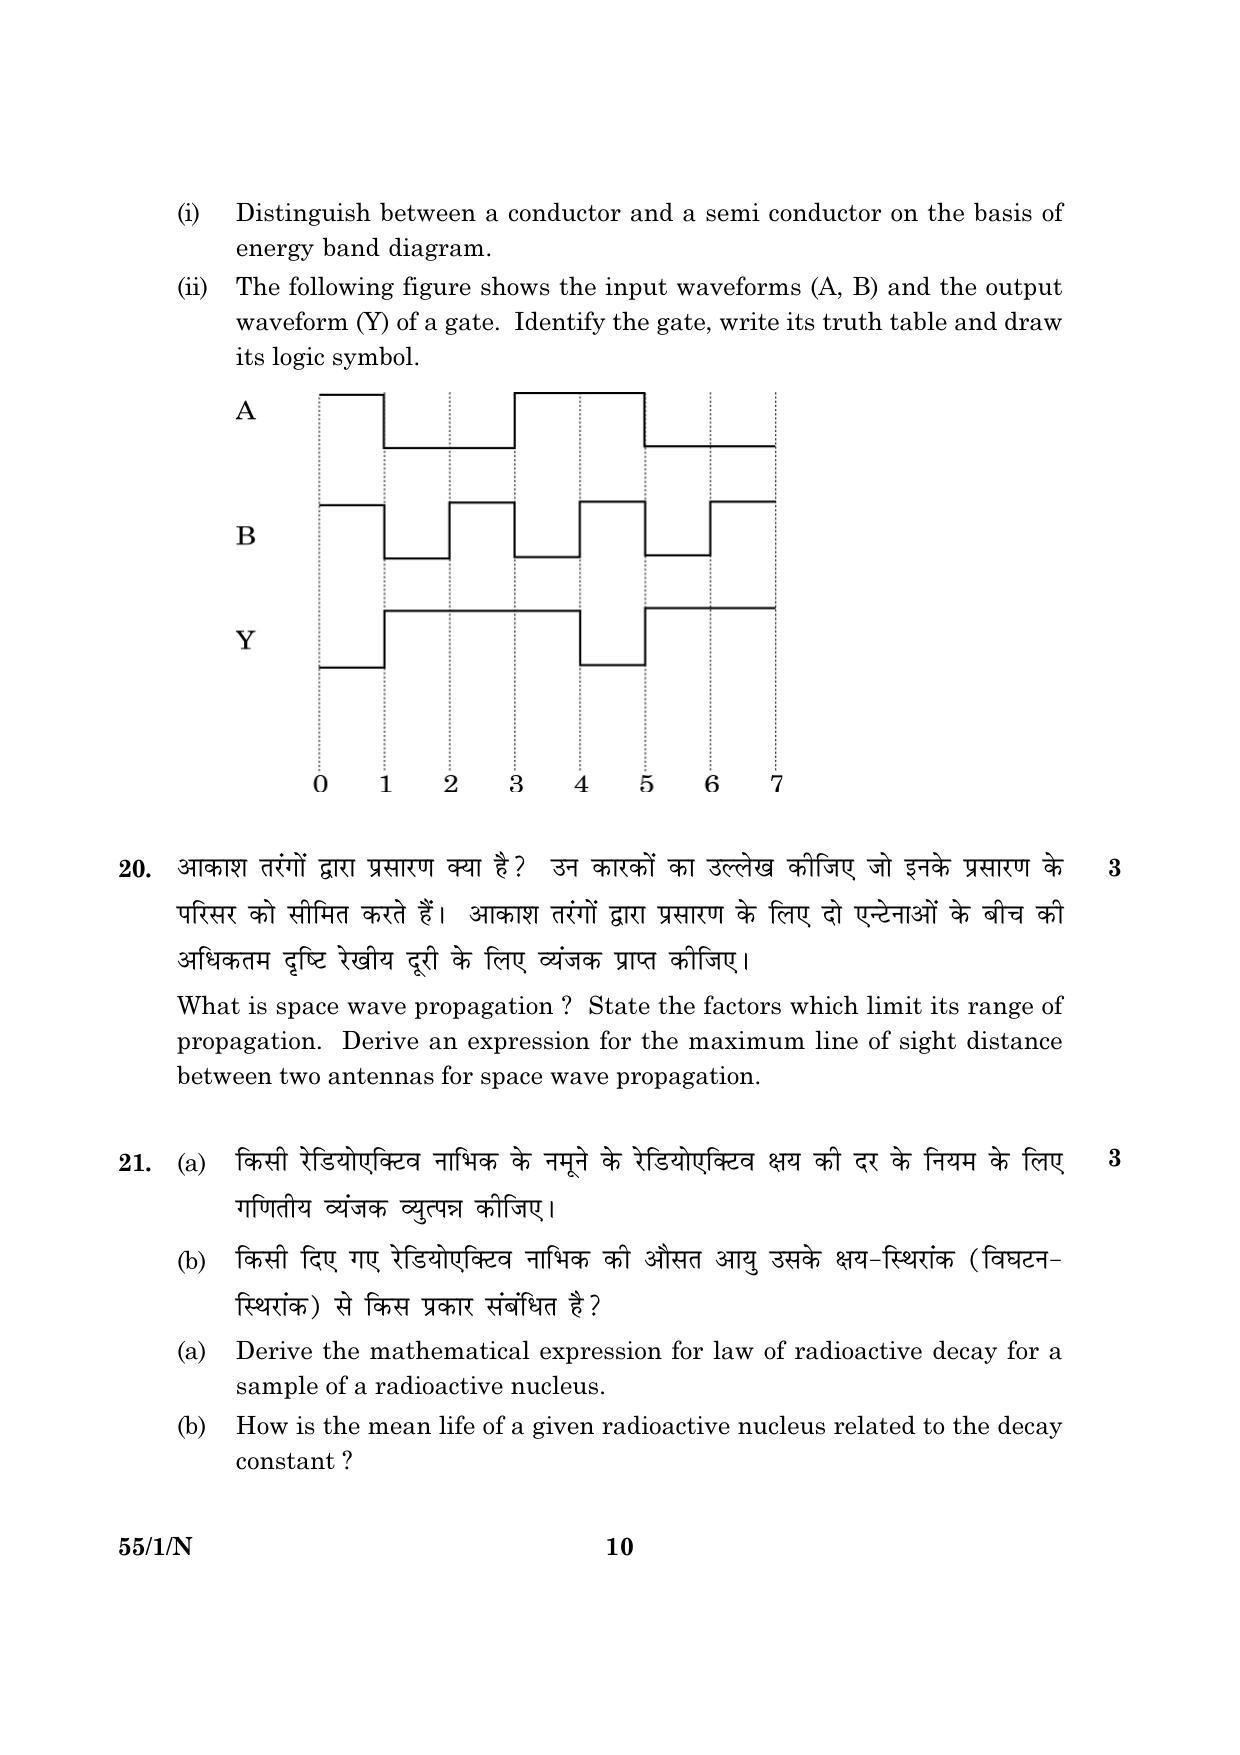 CBSE Class 12 055 Set 1 N Physics Theory 2016 Question Paper - Page 10